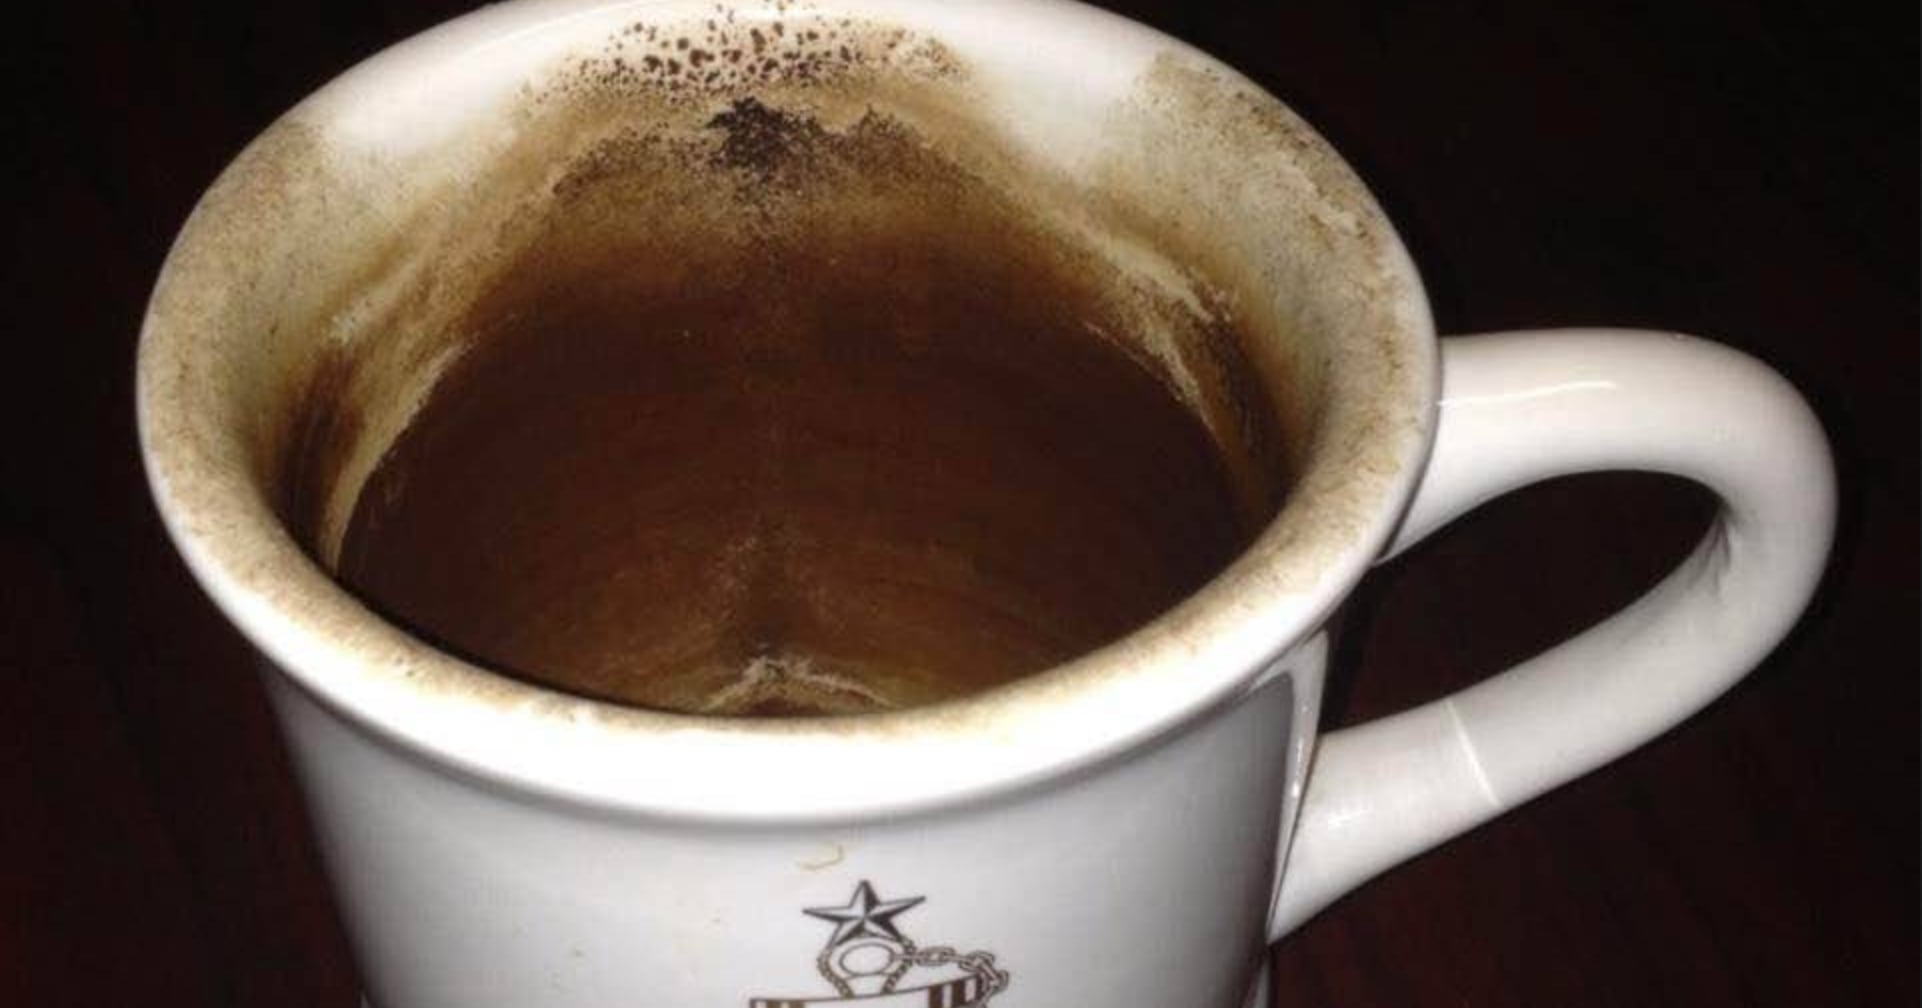 Why sailors love a filthy, unwashed coffee mug